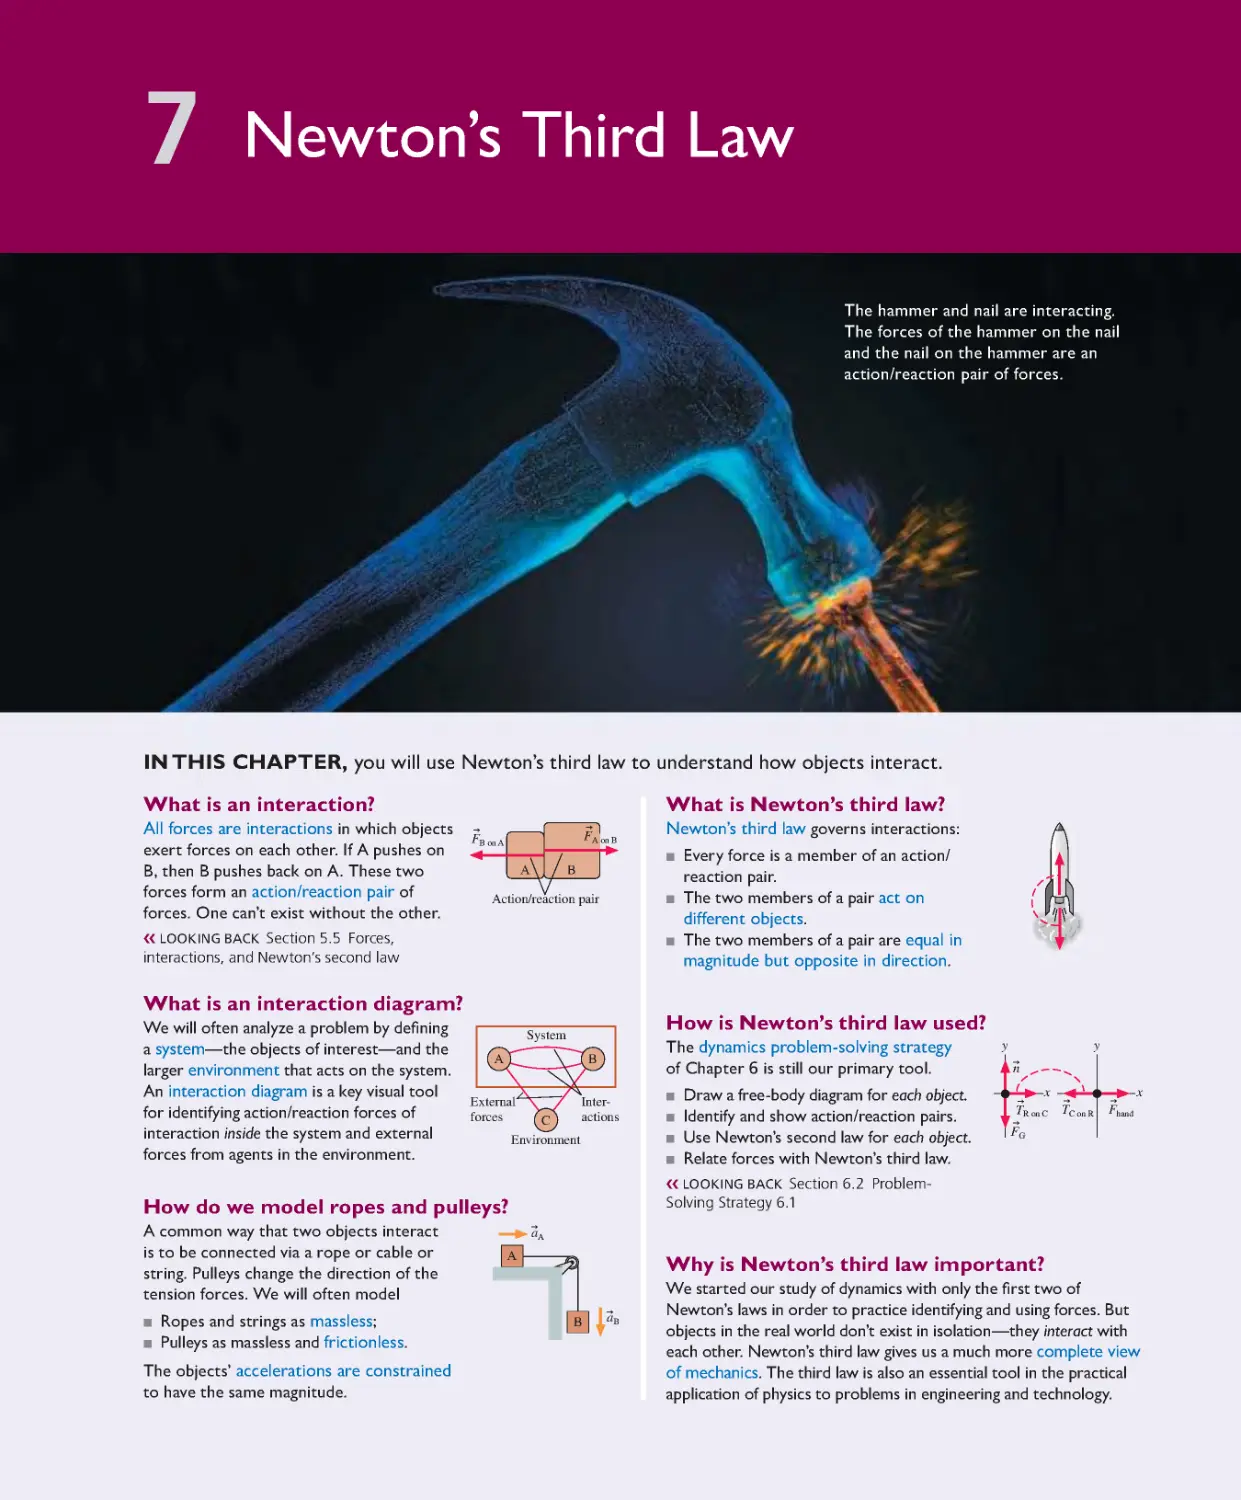 Chapter 7: Newton’s Third Law